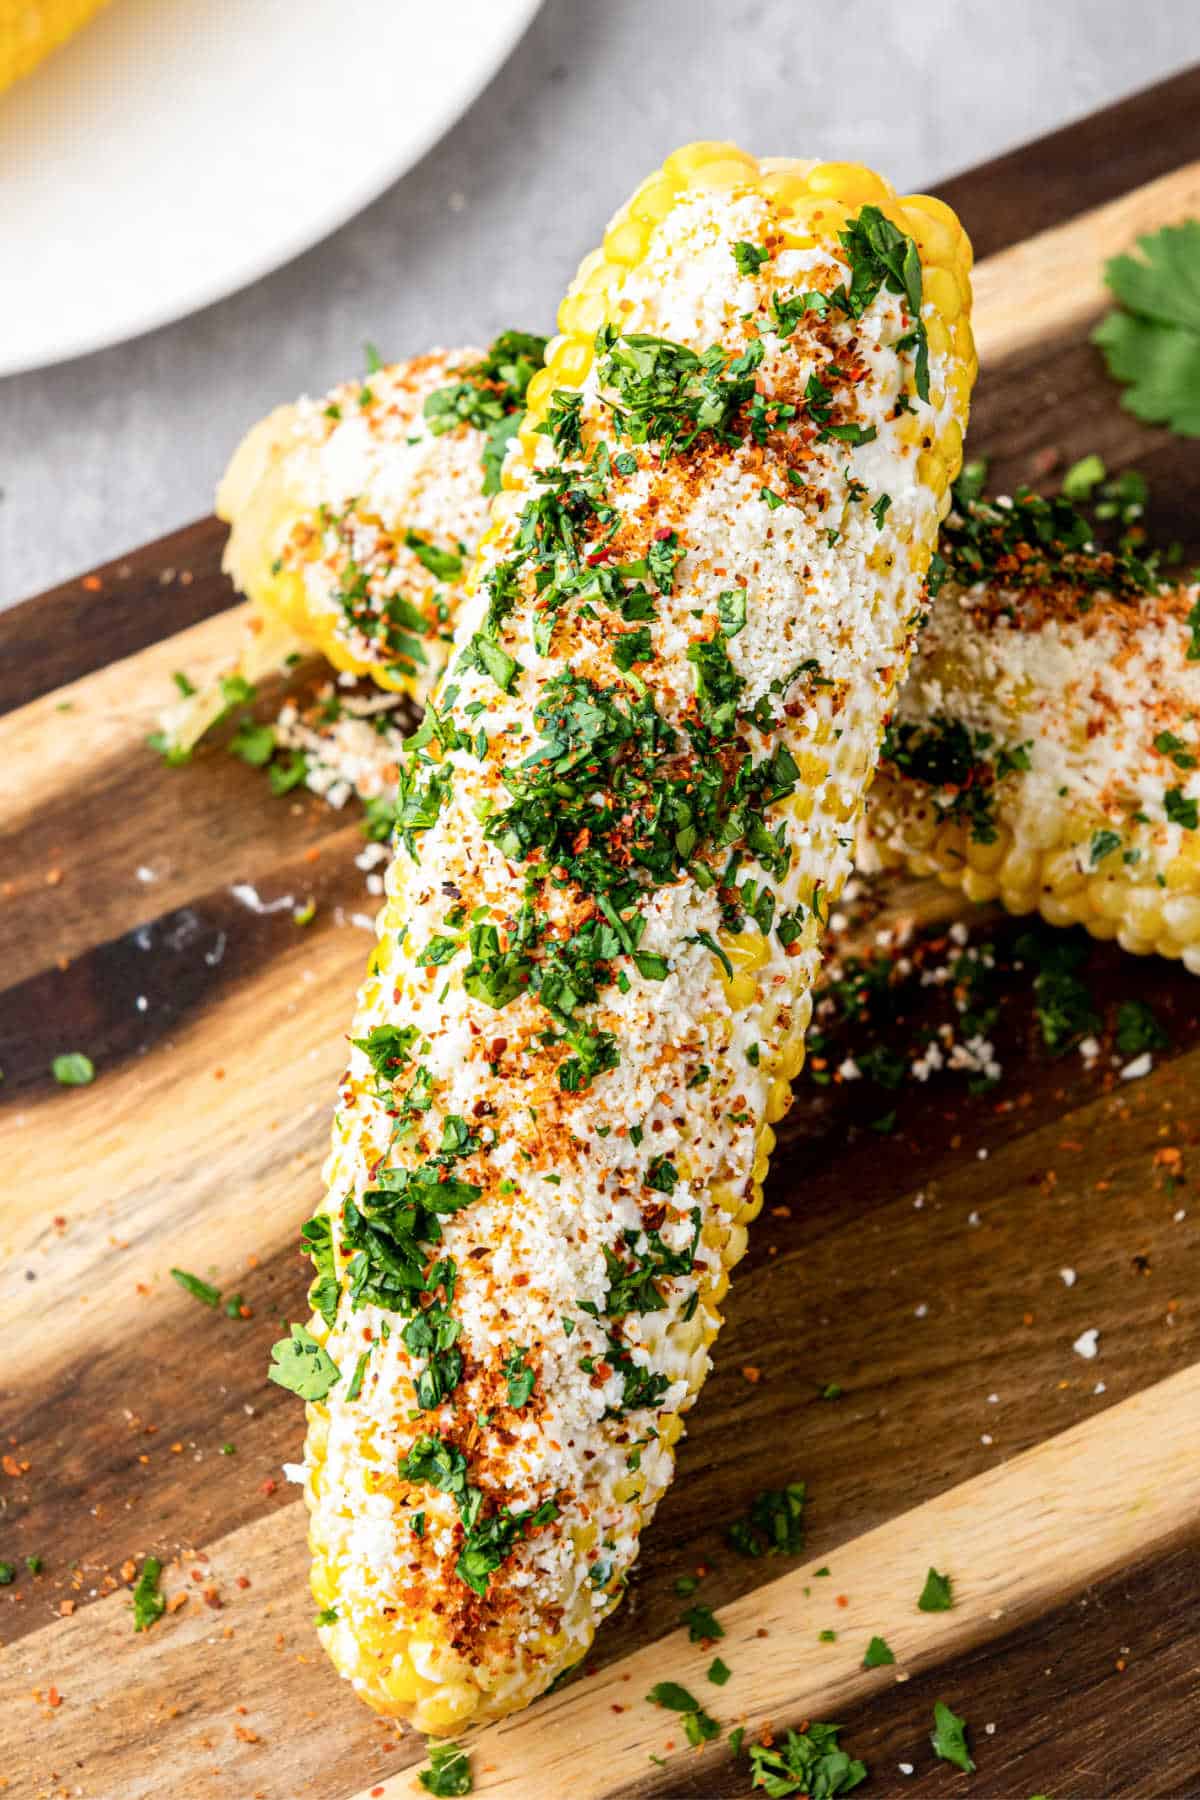 Two ears of corn, dressed as Mexican Street Corn, with one resting on the other.